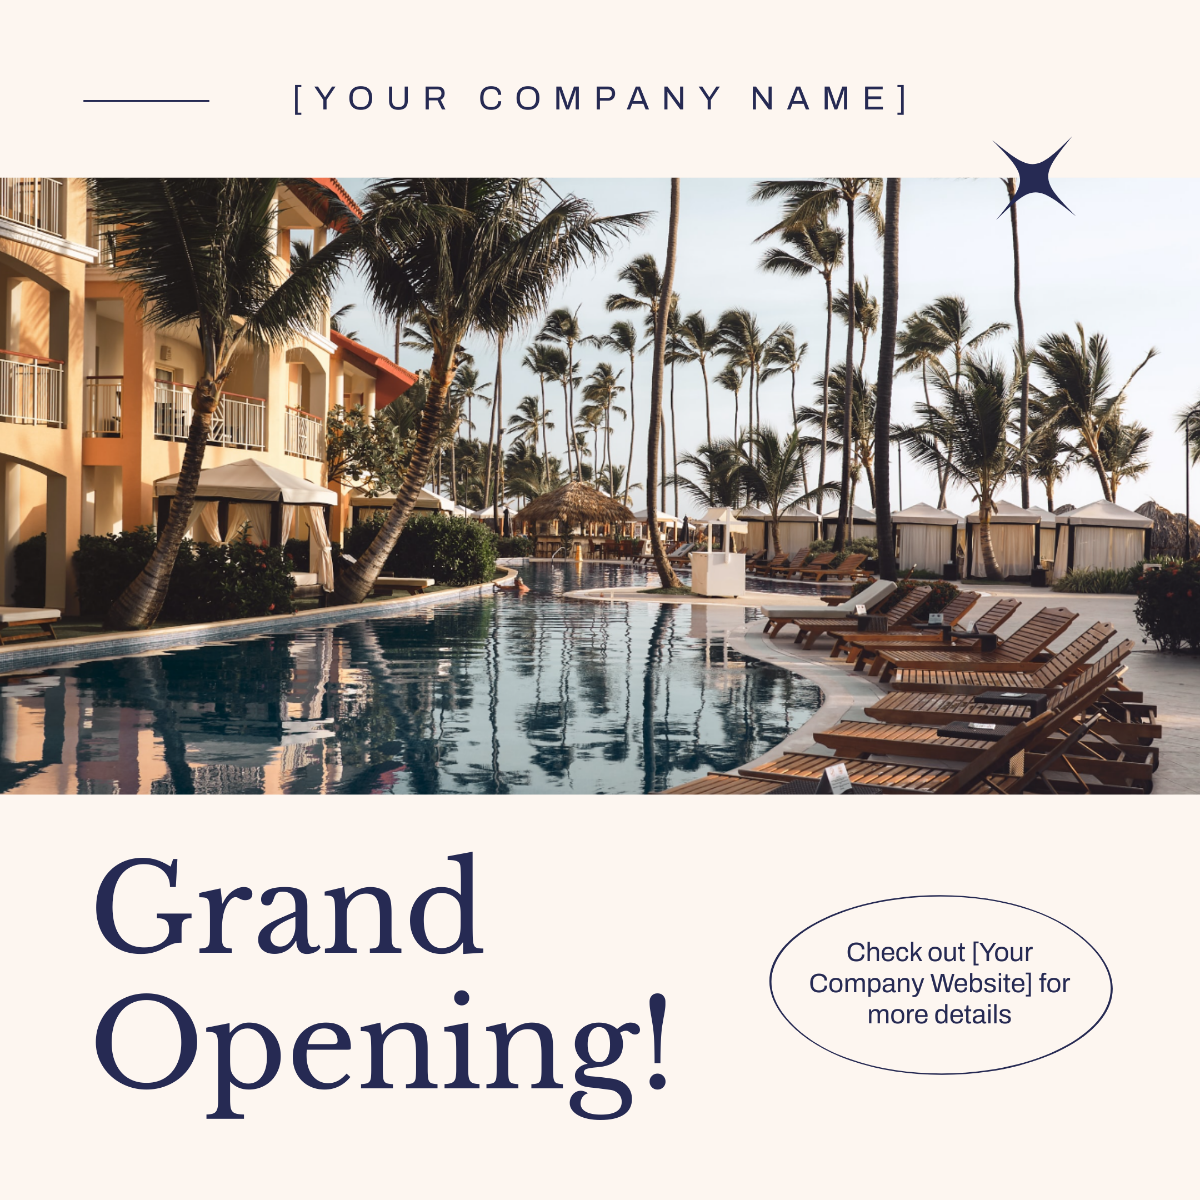 Grand Opening Instagram Carousel Ad Template